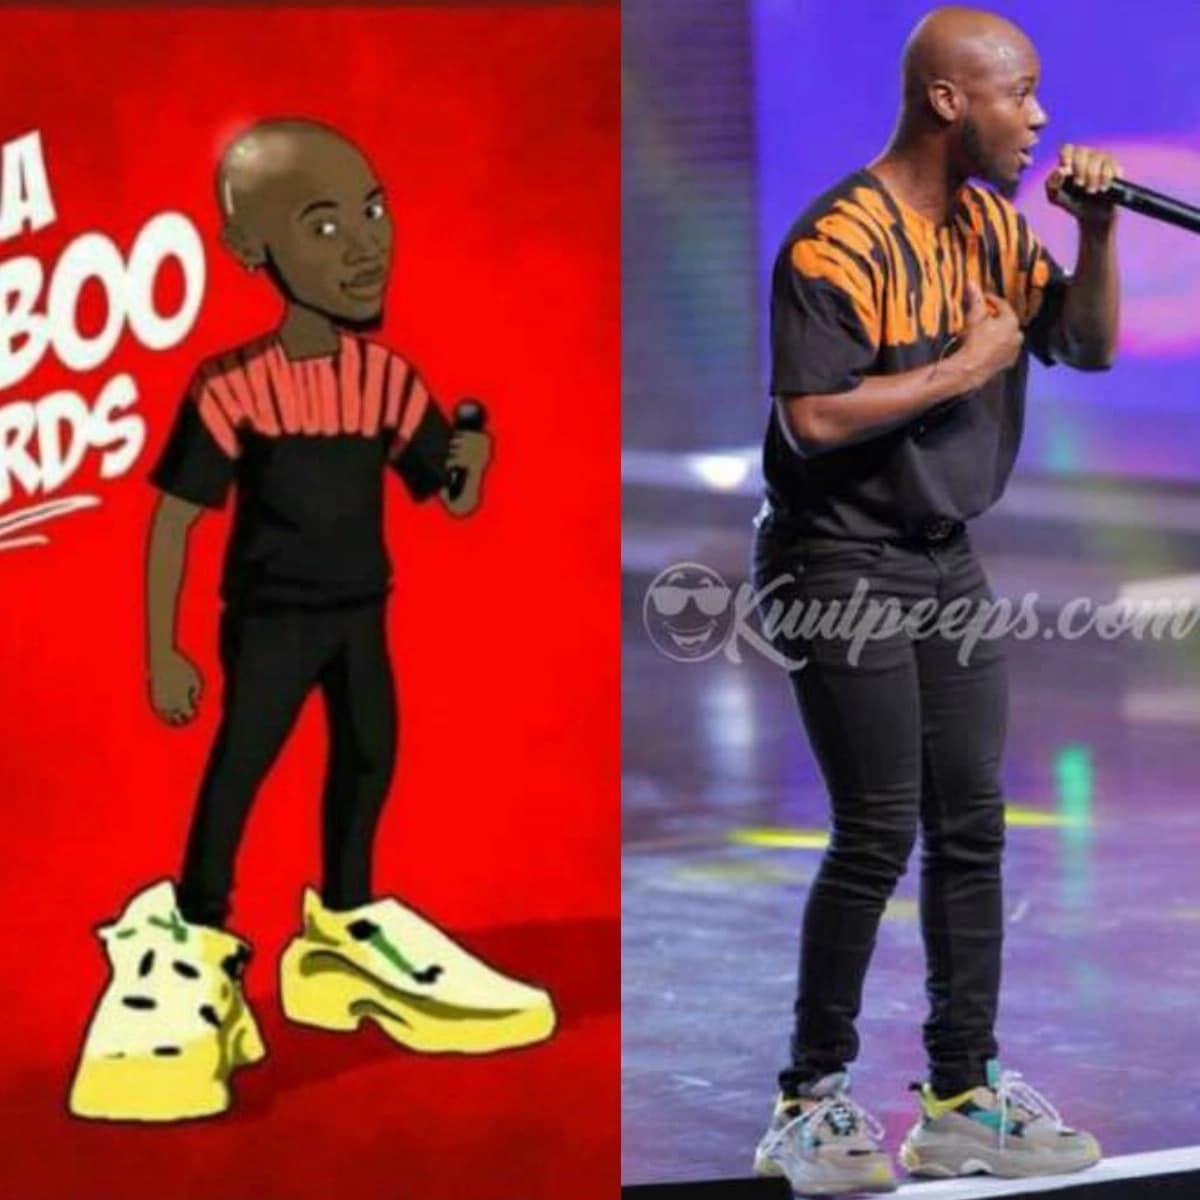 One of the artworks trolling King Promise's shoe at the VGMAs